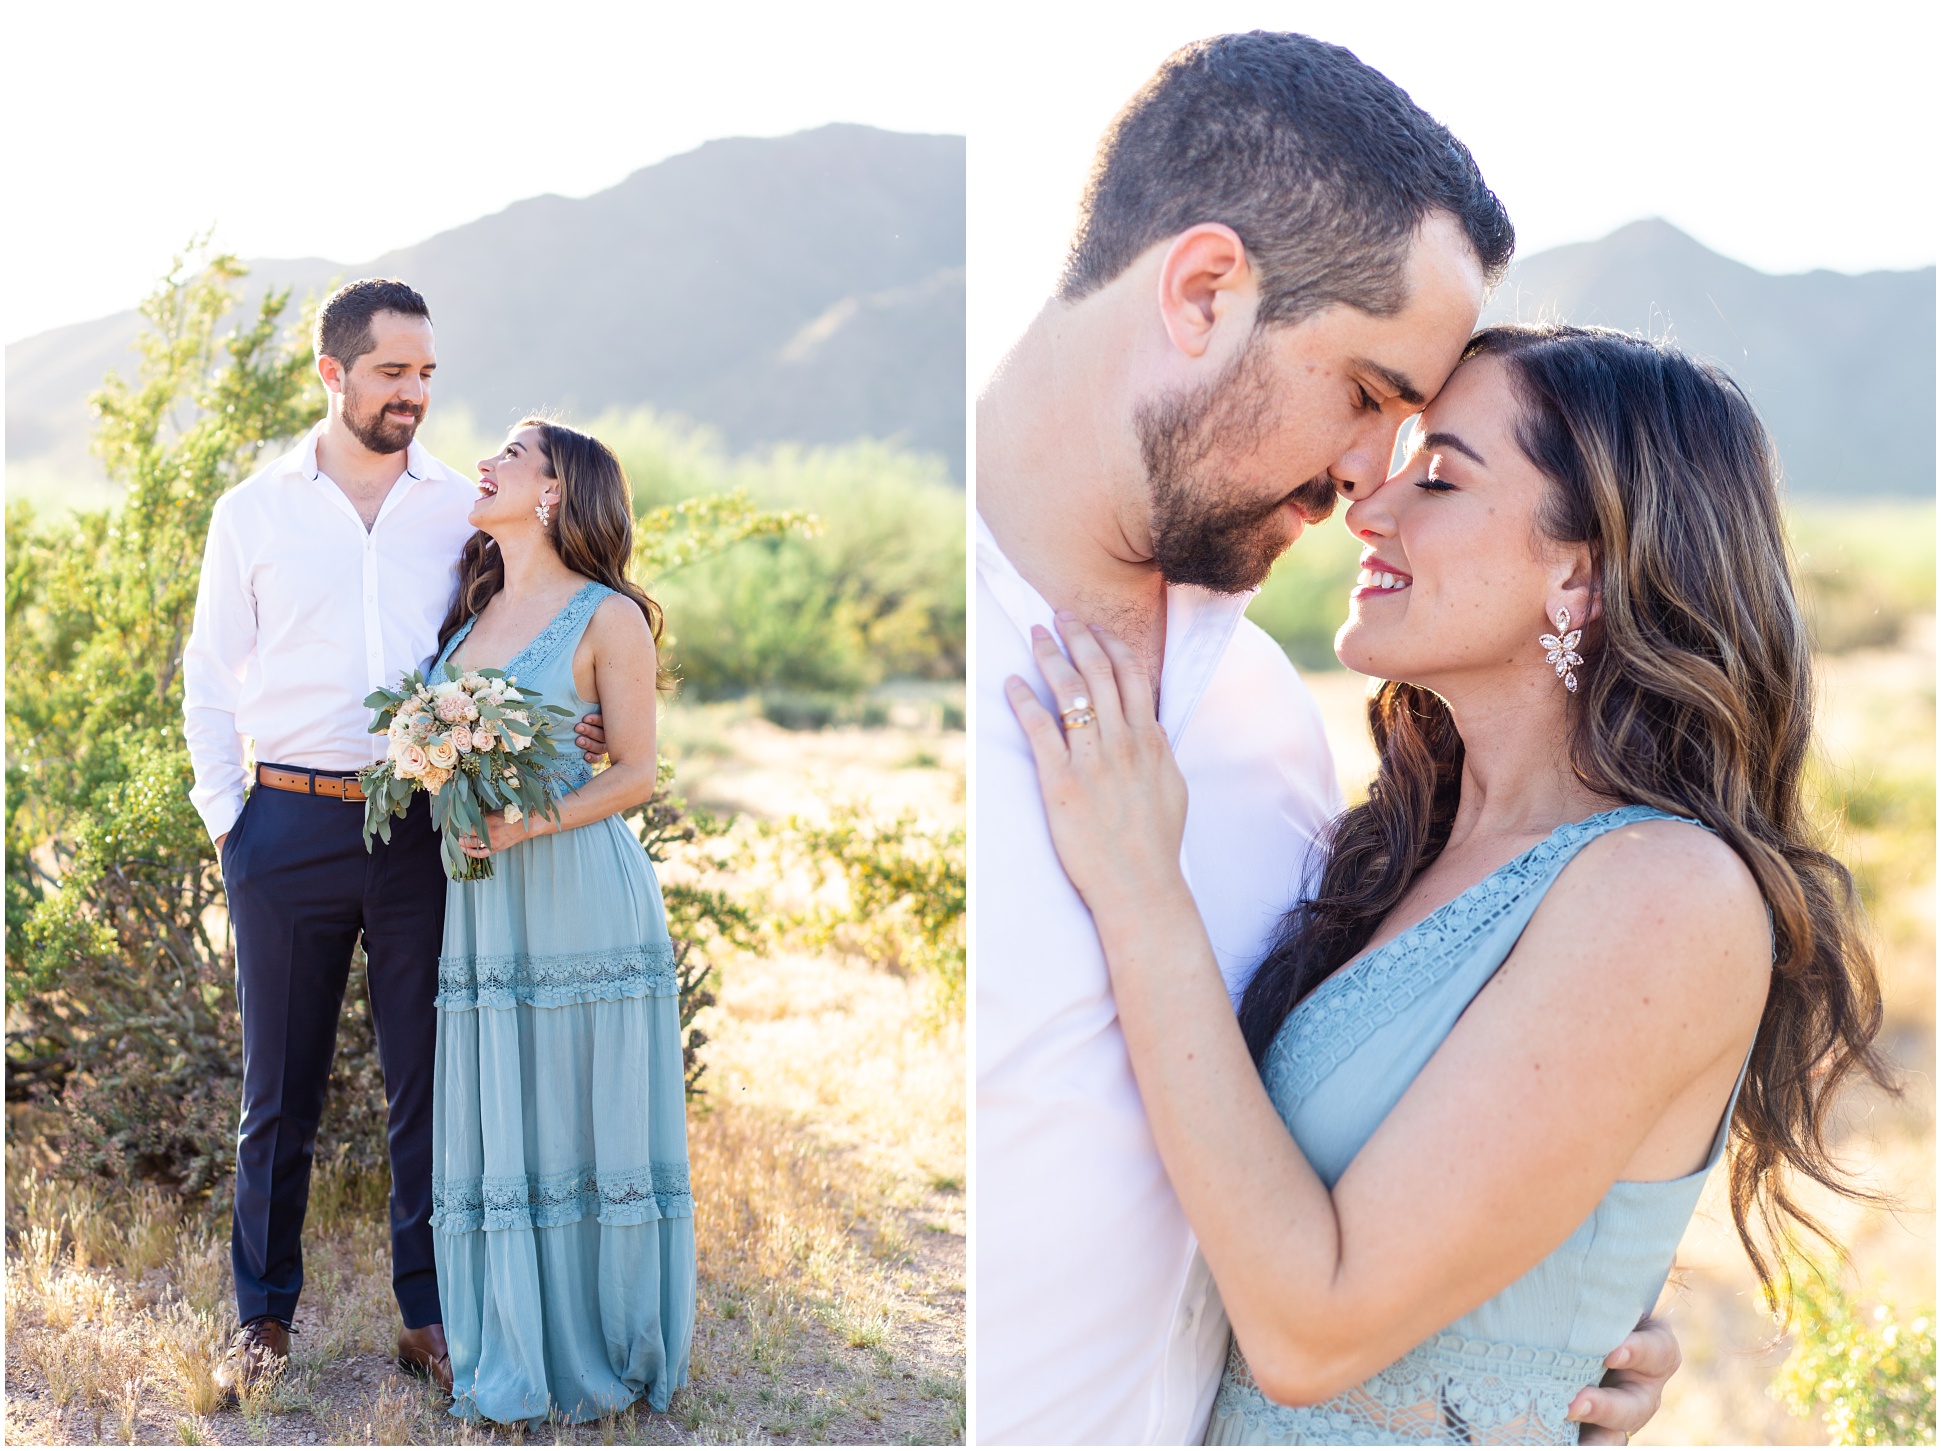 Two images of Anette De La Rosa and her husband Paul in the desert